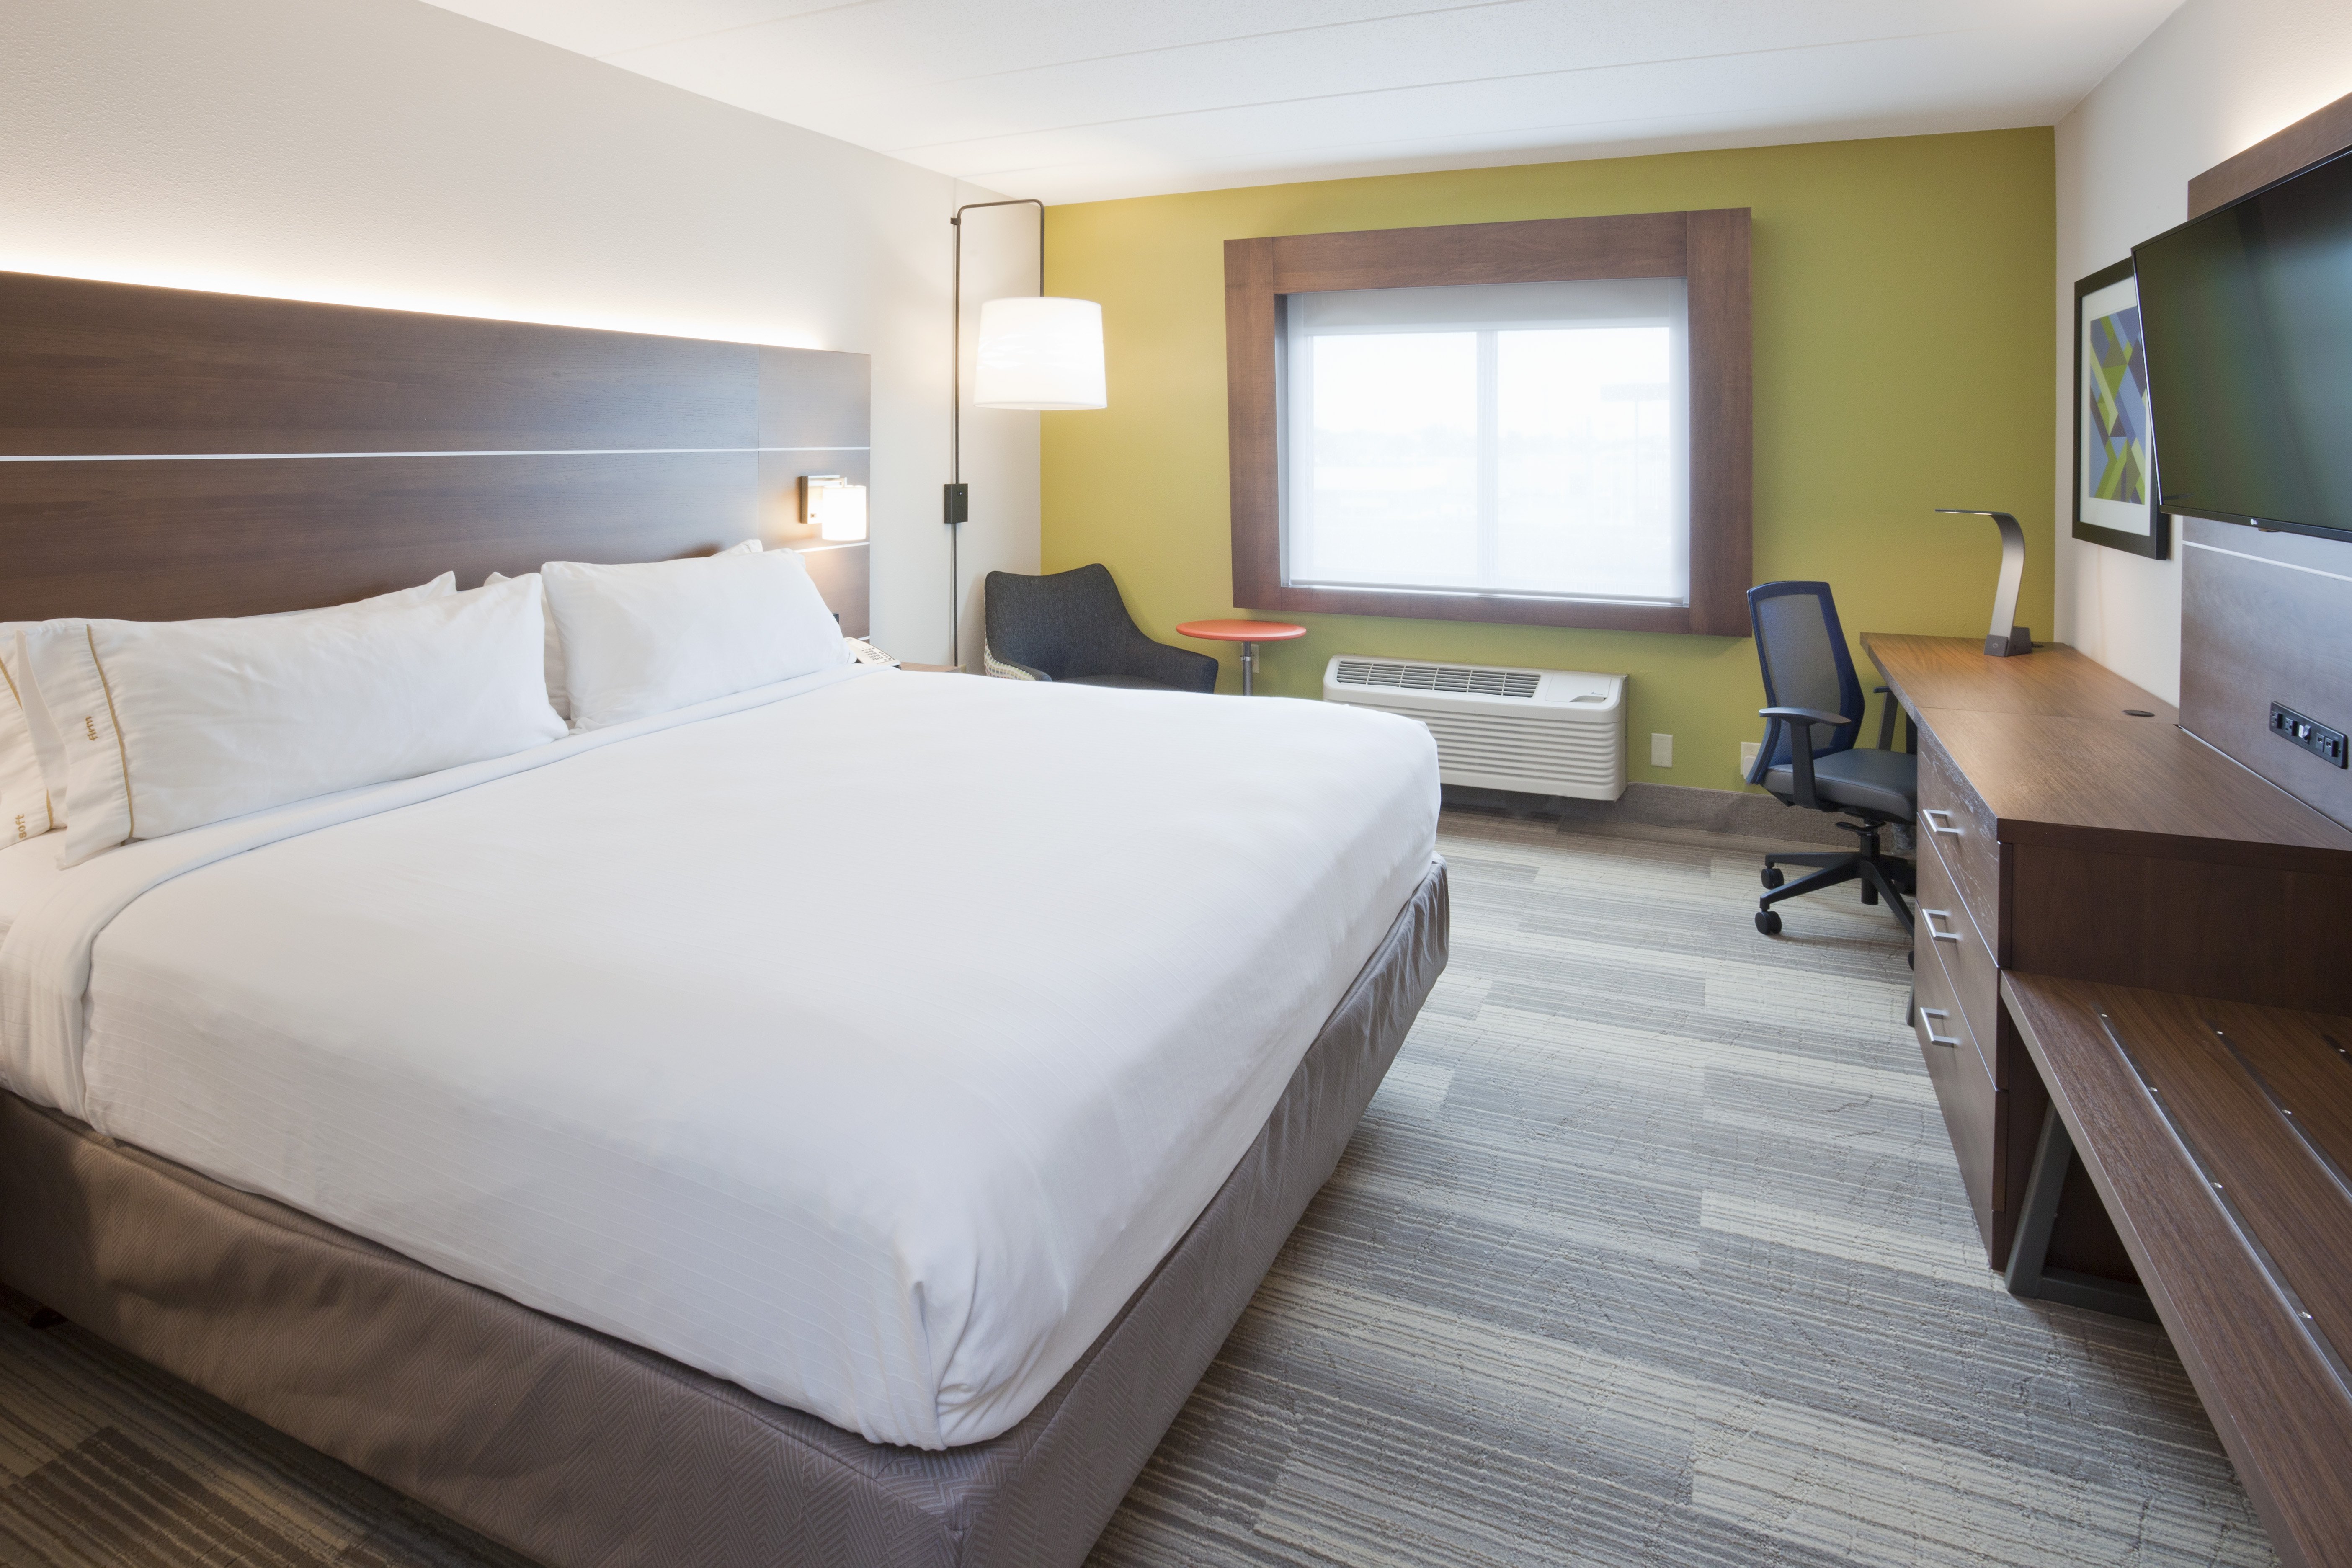 Reserve a comfortable King room for your next Roseville visit!